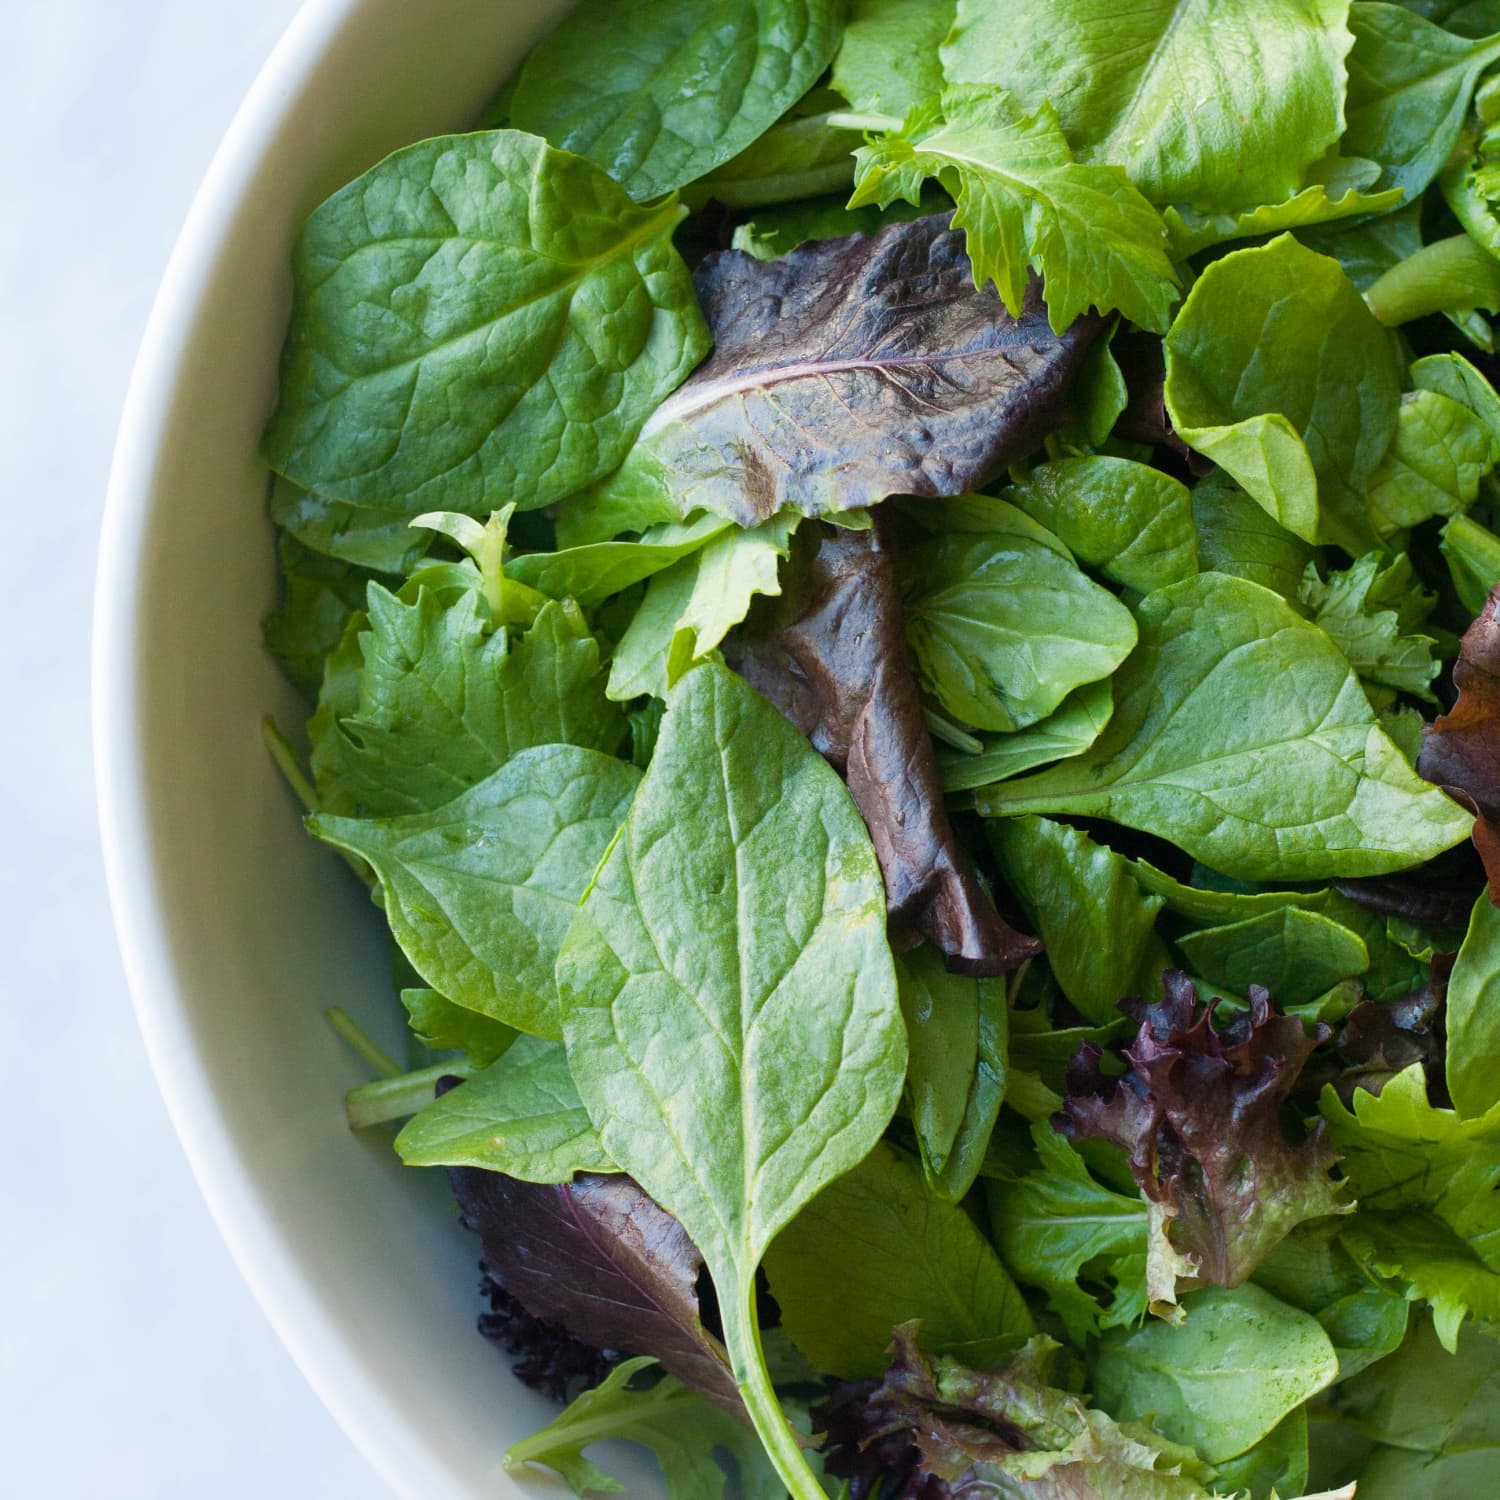 How to Wash and Store Salad Greens - Loveleaf Co.